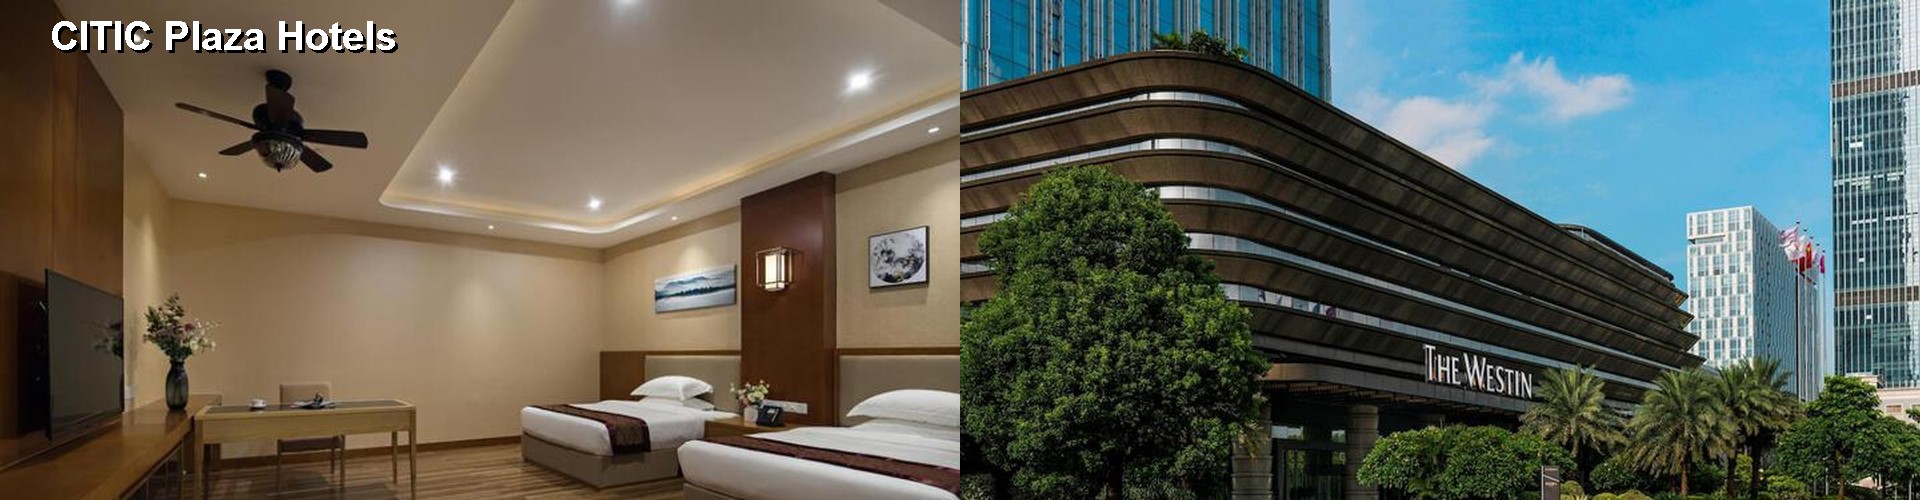 5 Best Hotels near CITIC Plaza